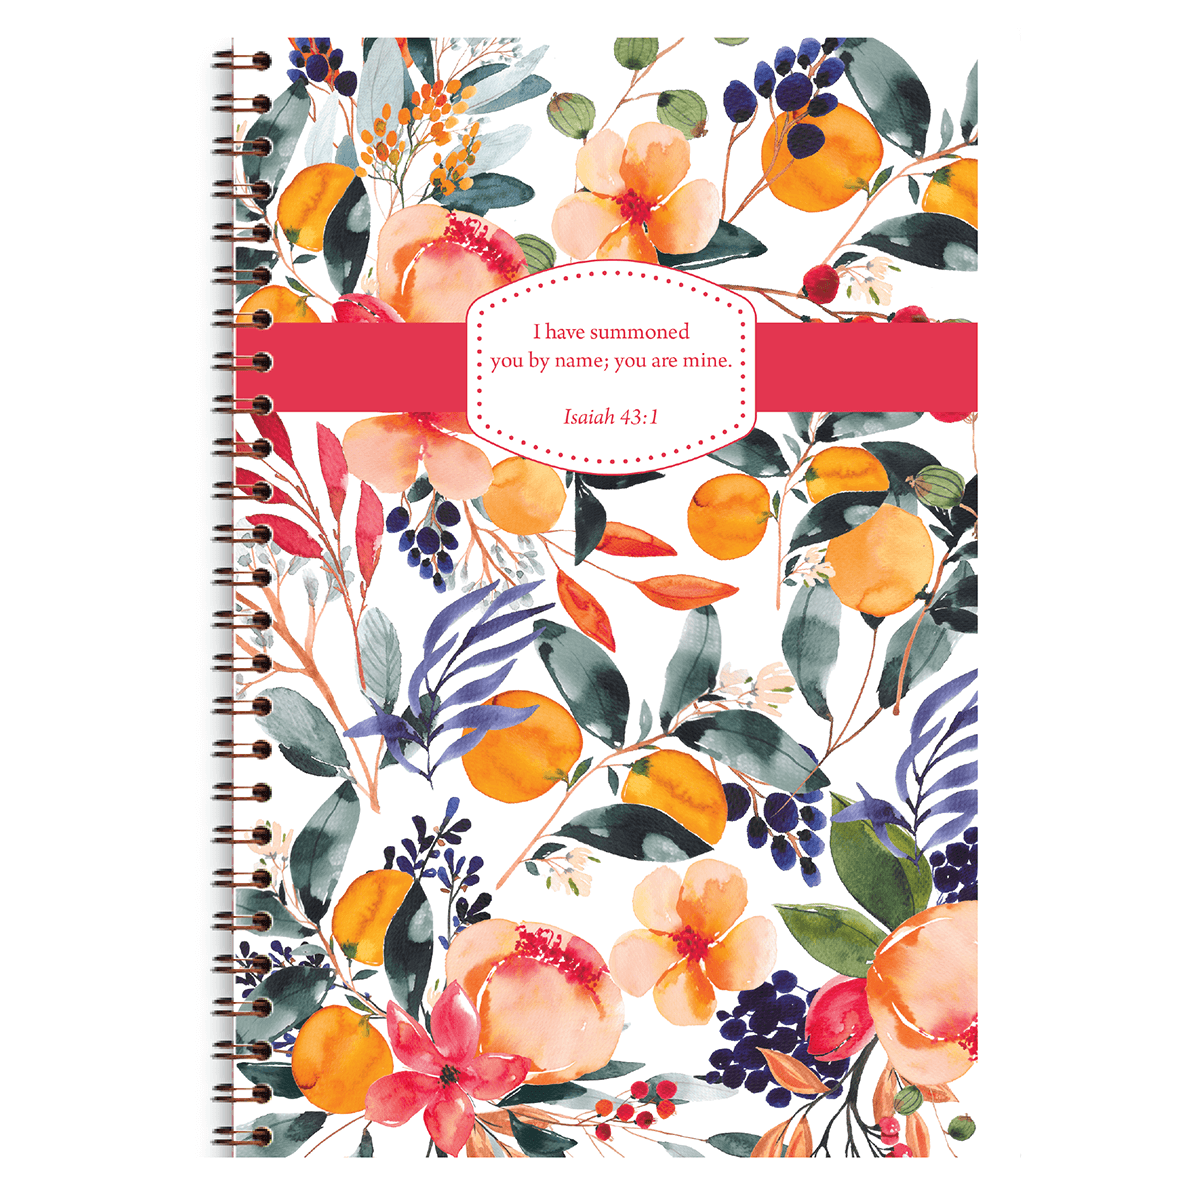 Personalized Journal and Notebooks, Journals for Women, Journal